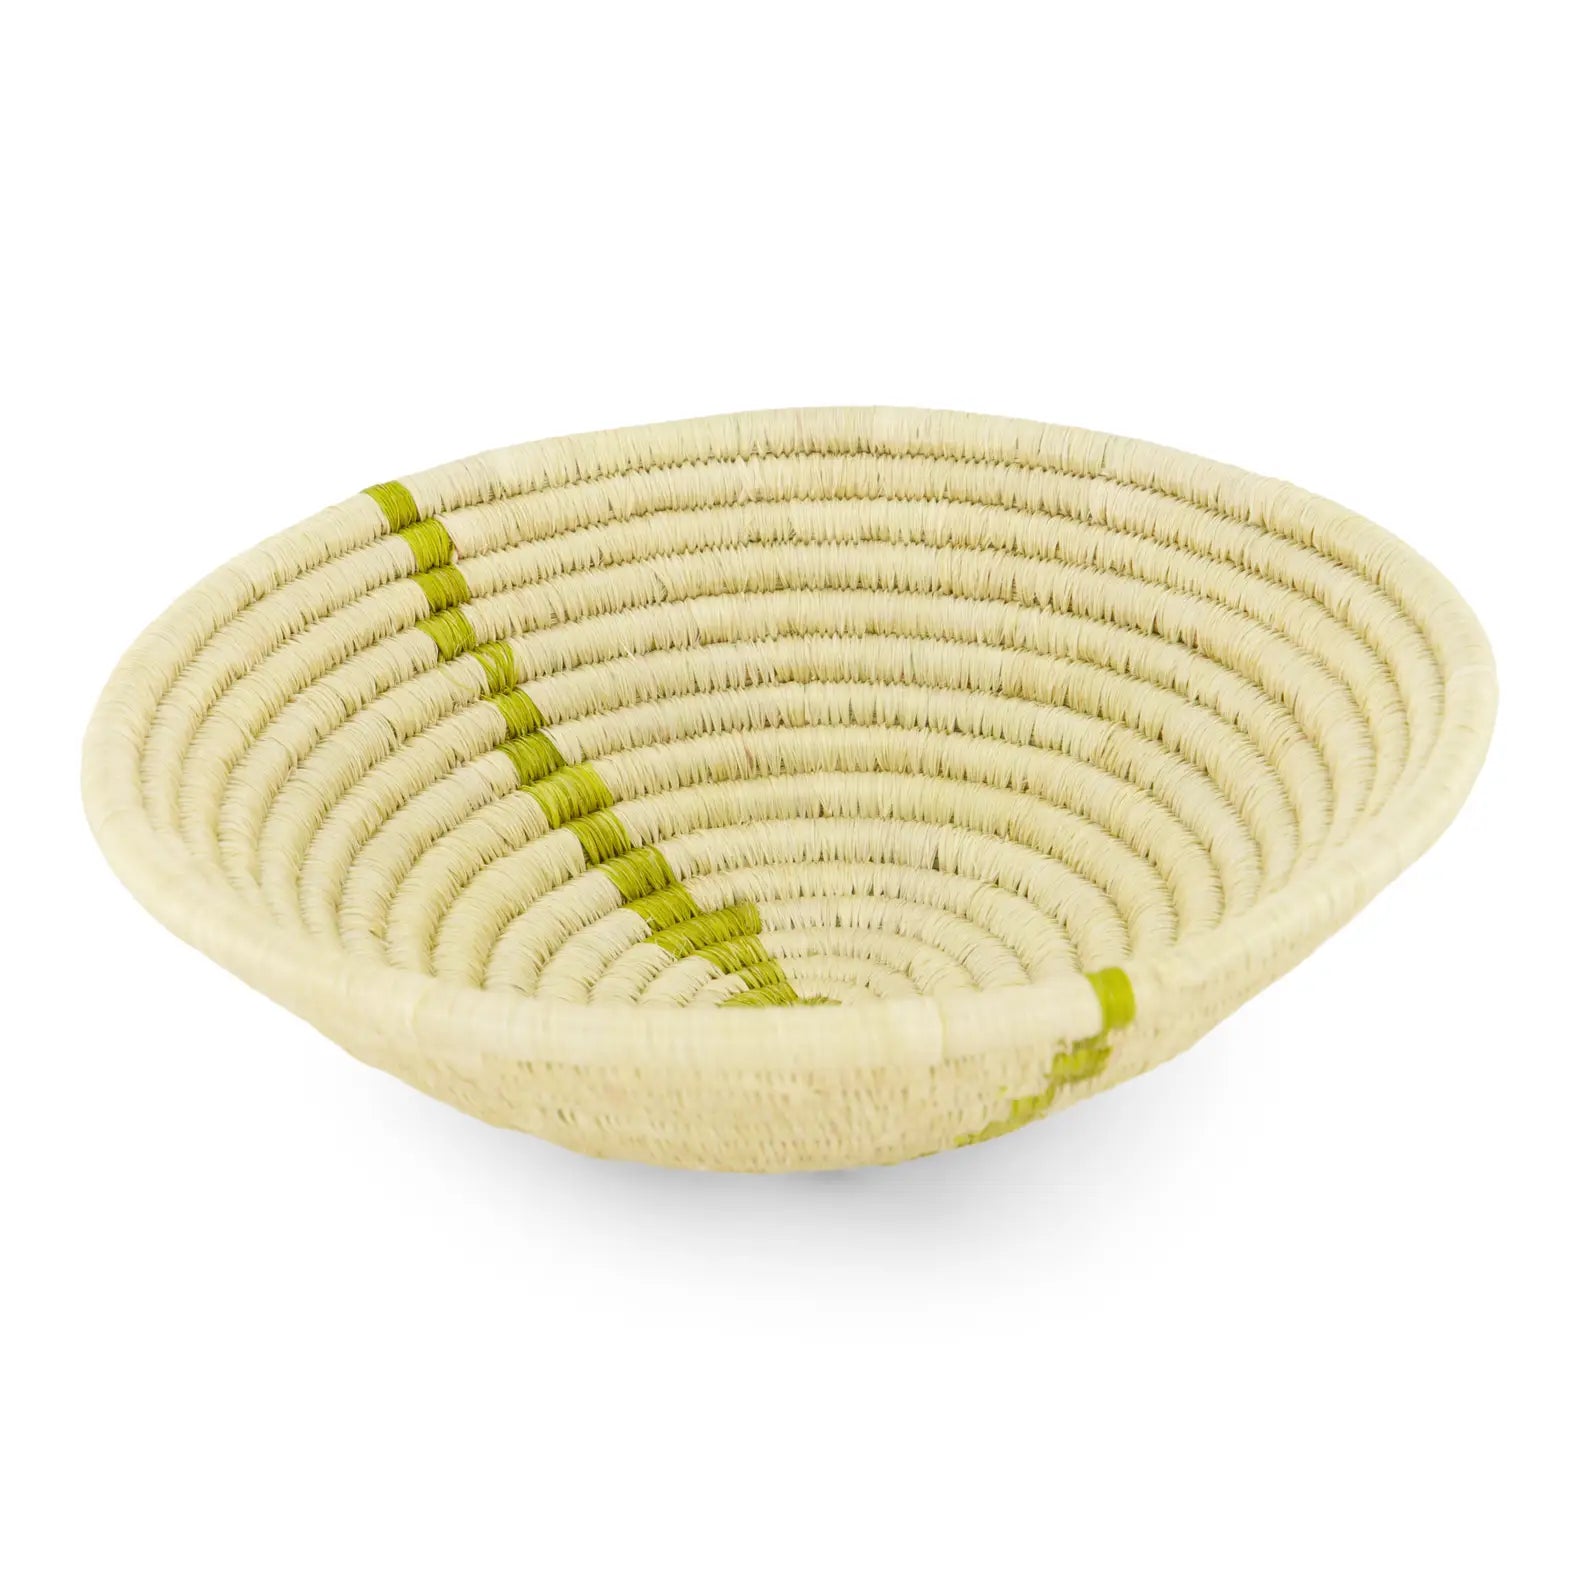 Striped Olive Small Artisan Made Basket